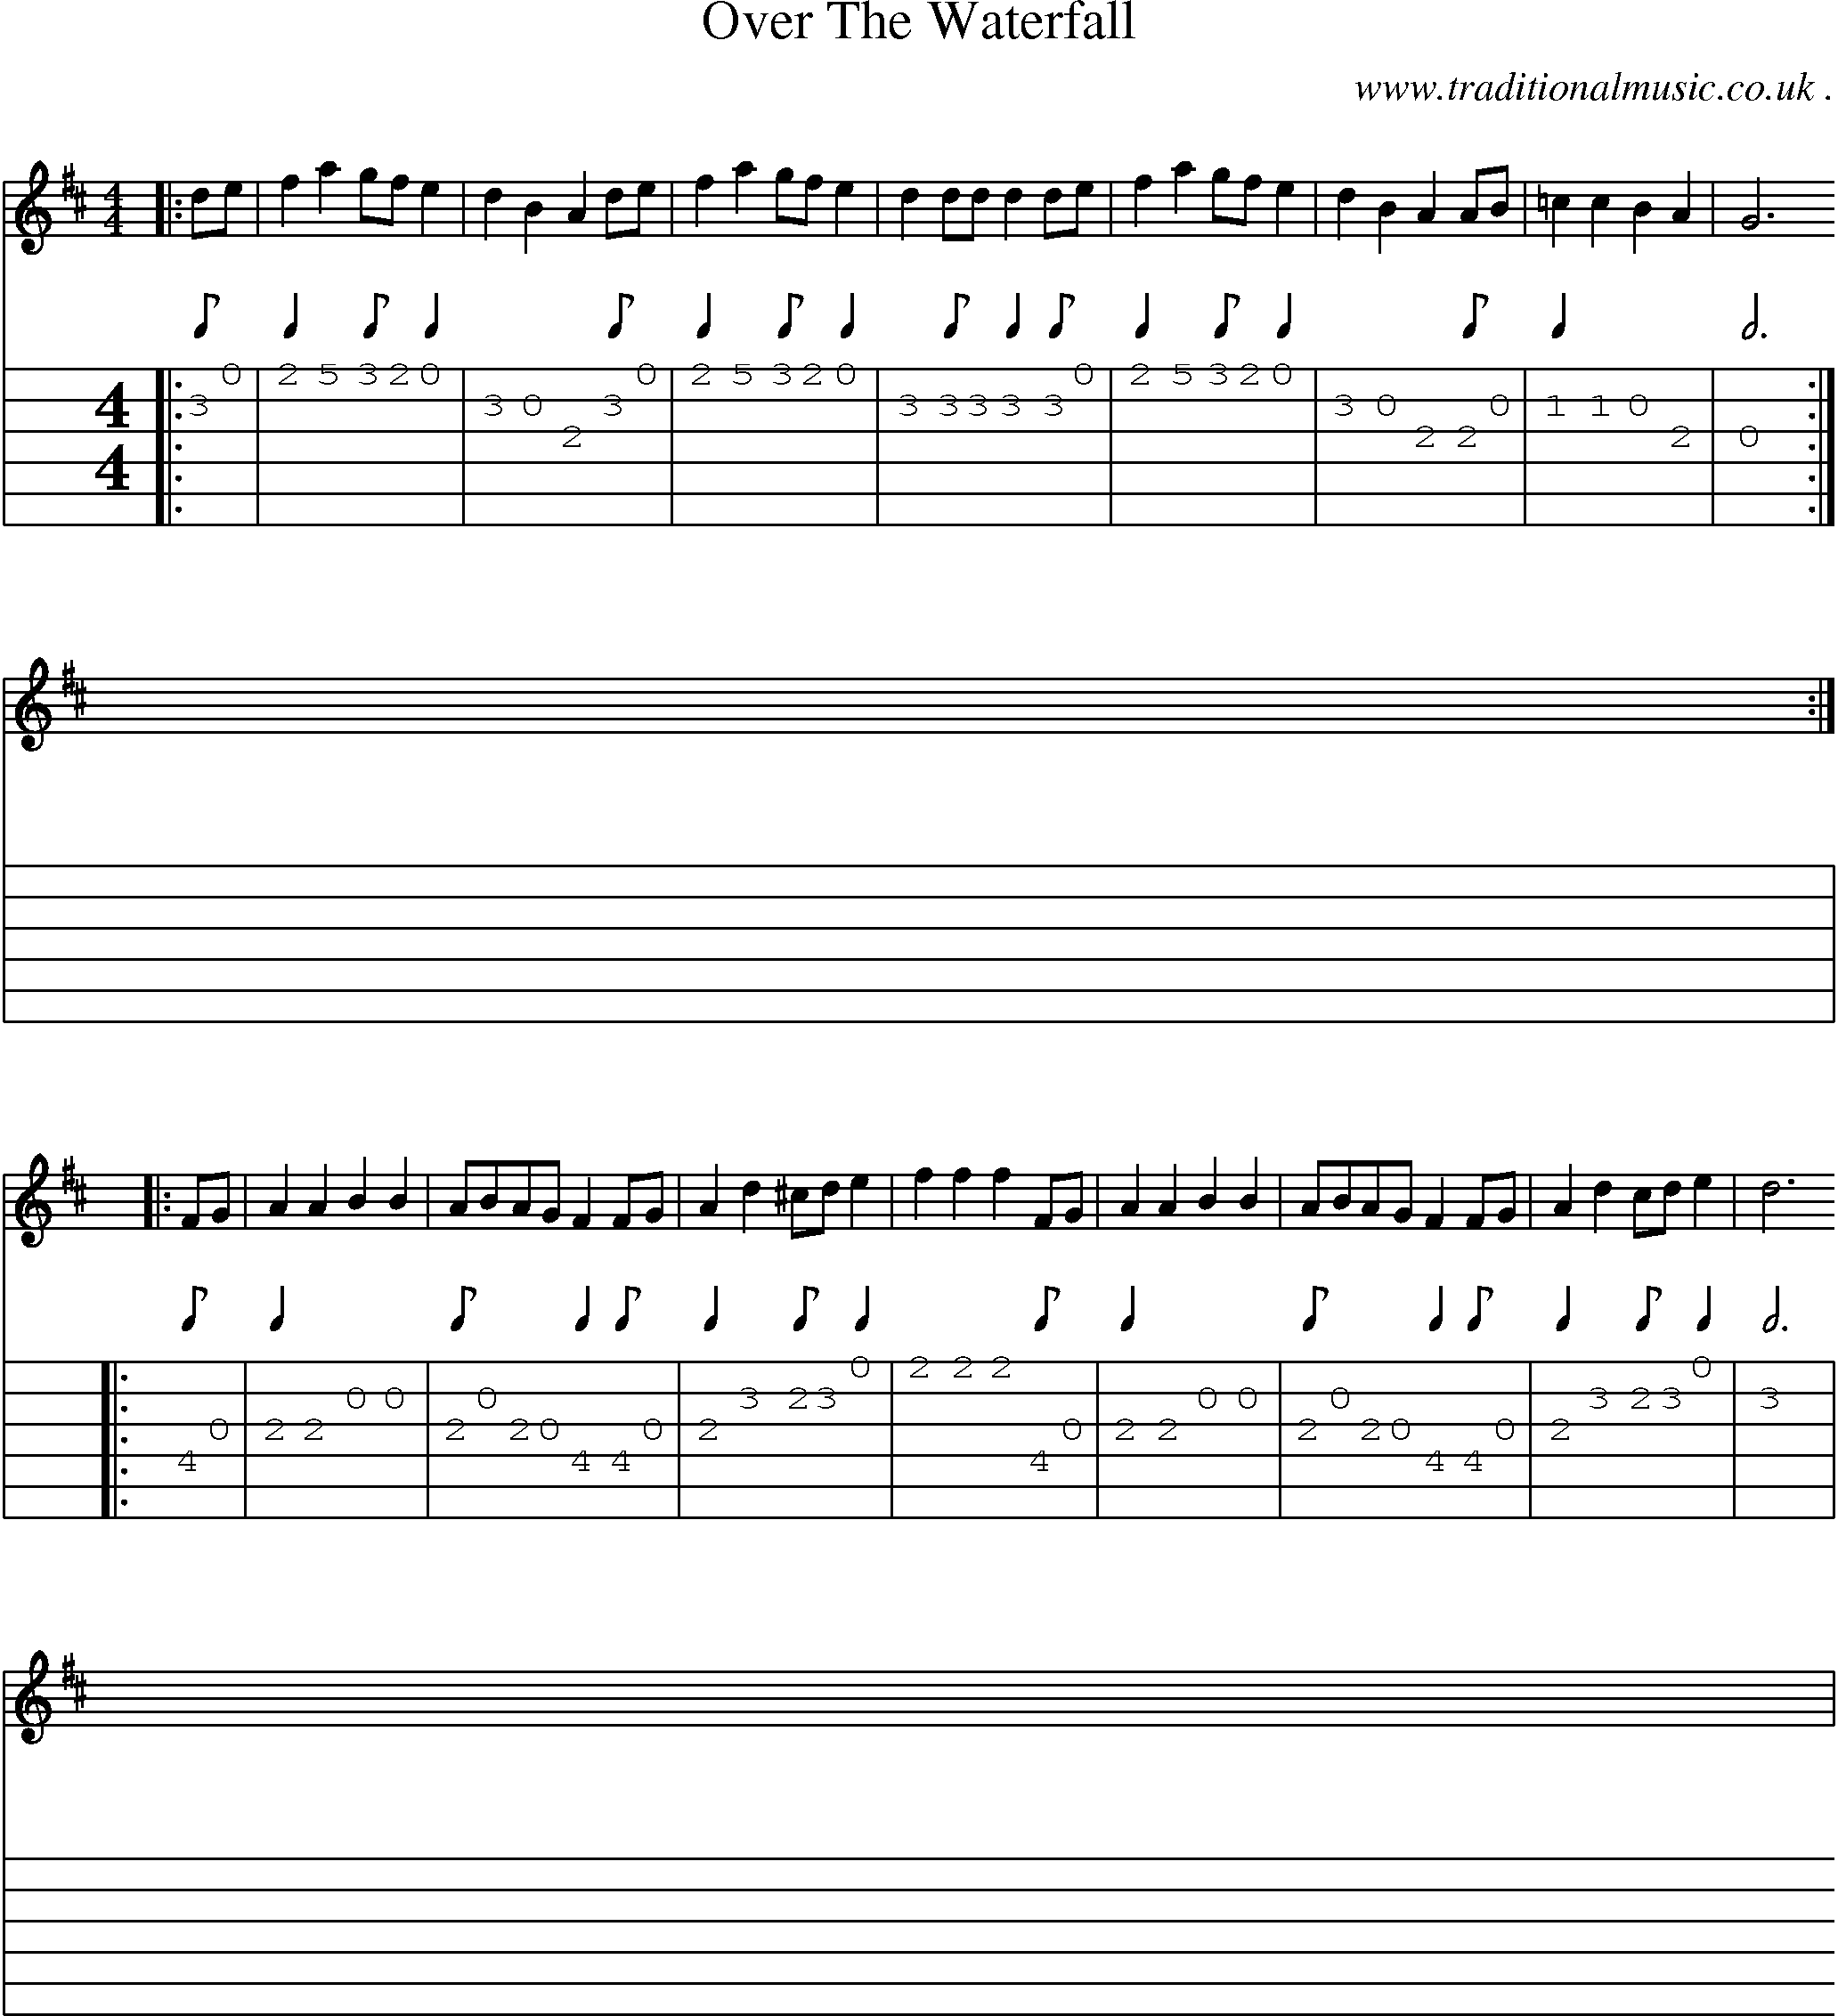 Music Score and Guitar Tabs for Over The Waterfall